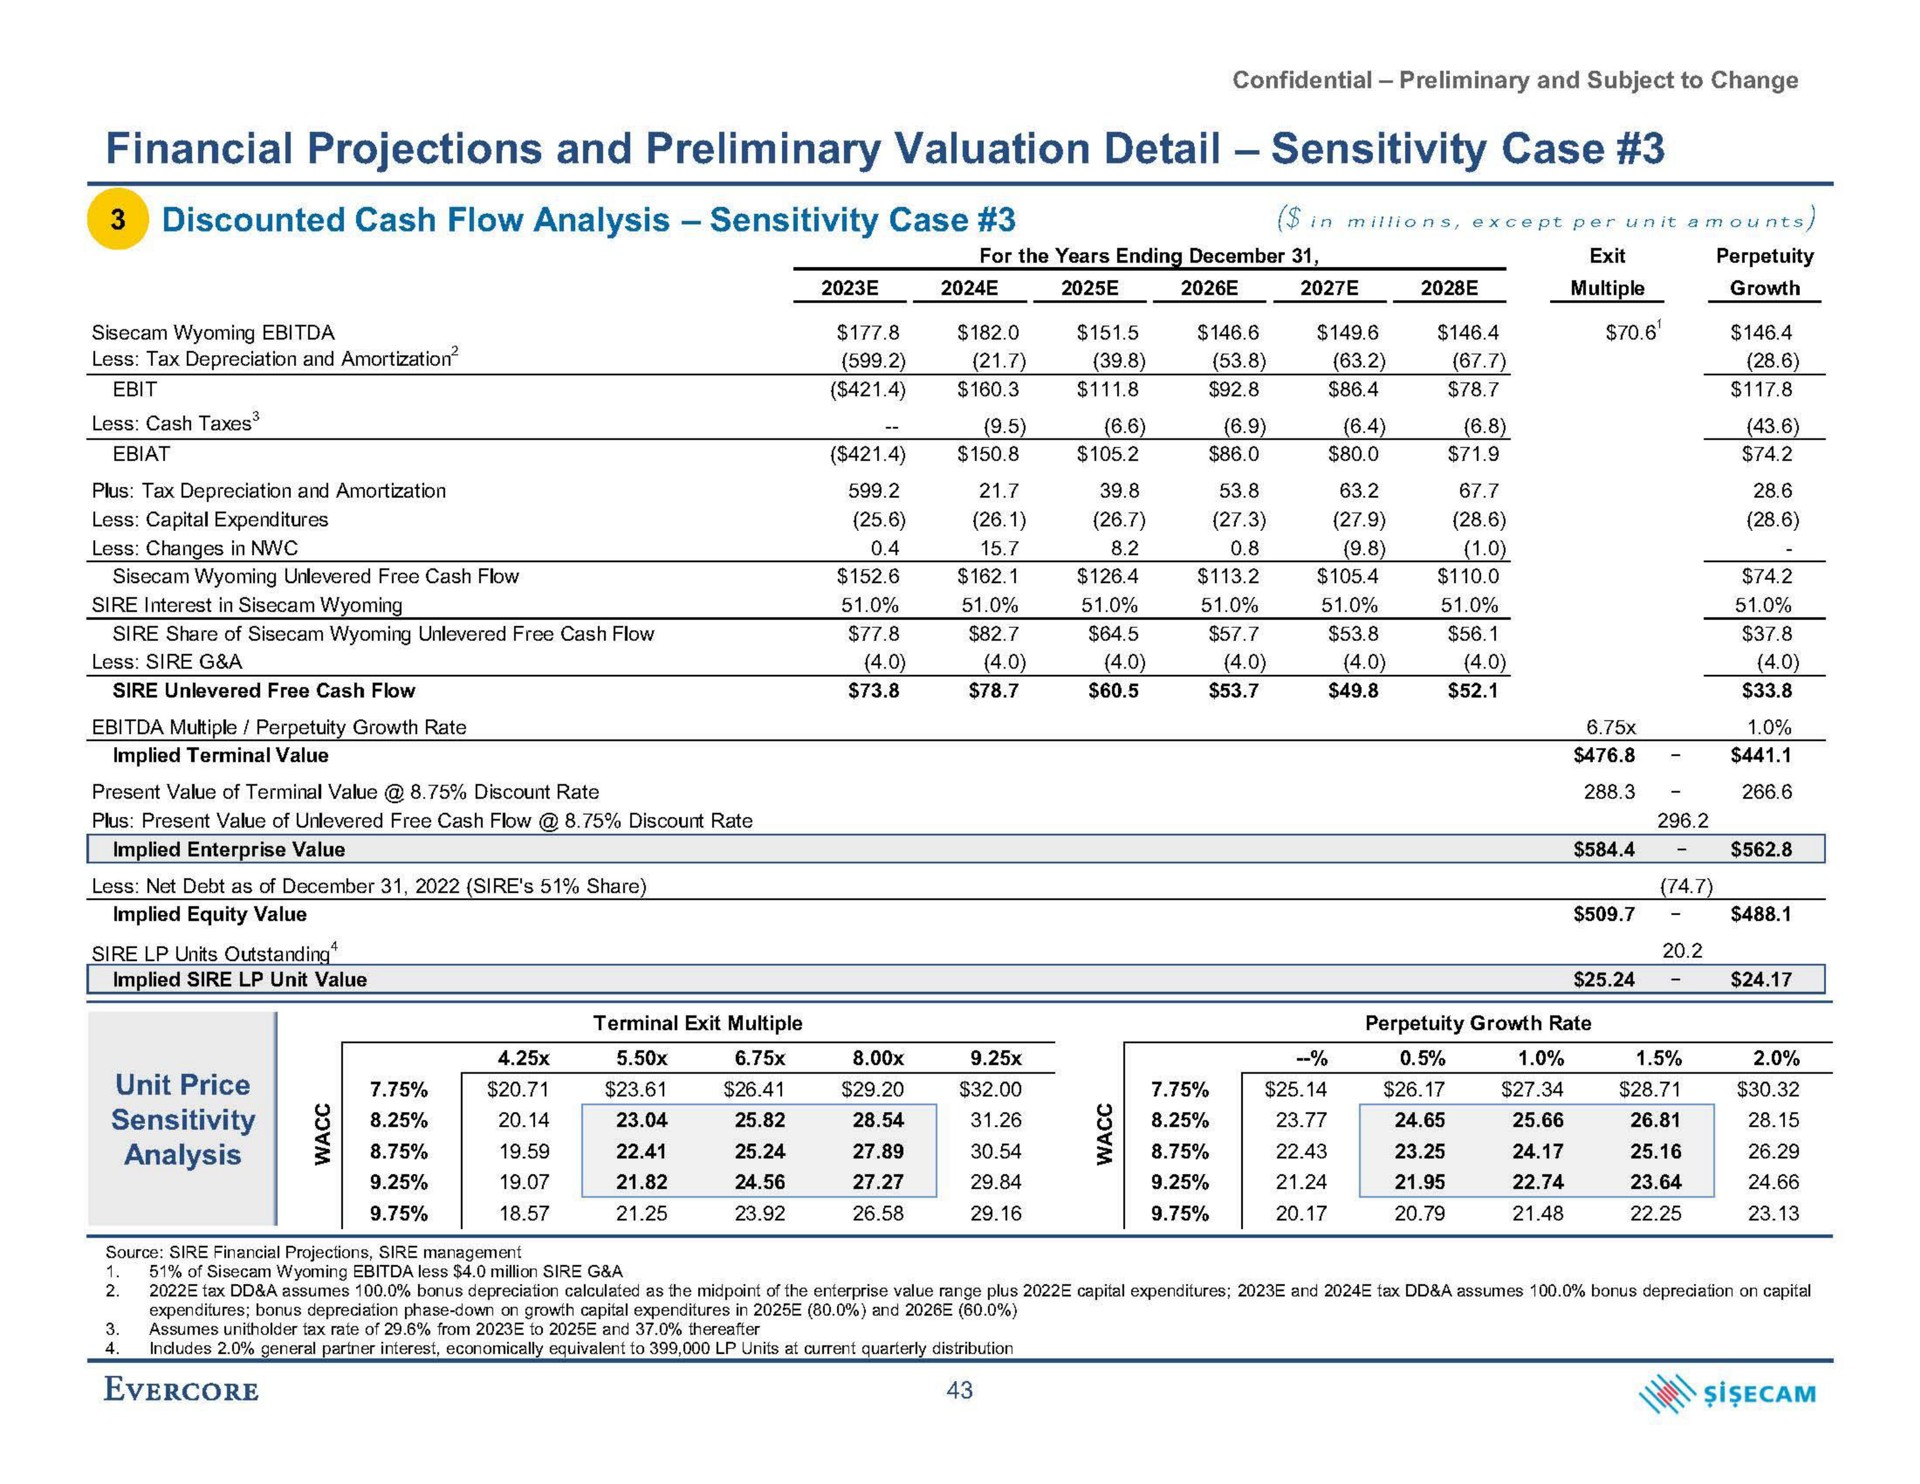 financial projections and preliminary valuation detail sensitivity case discounted cash flow analysis sensitivity case in except per unit amounts | Evercore